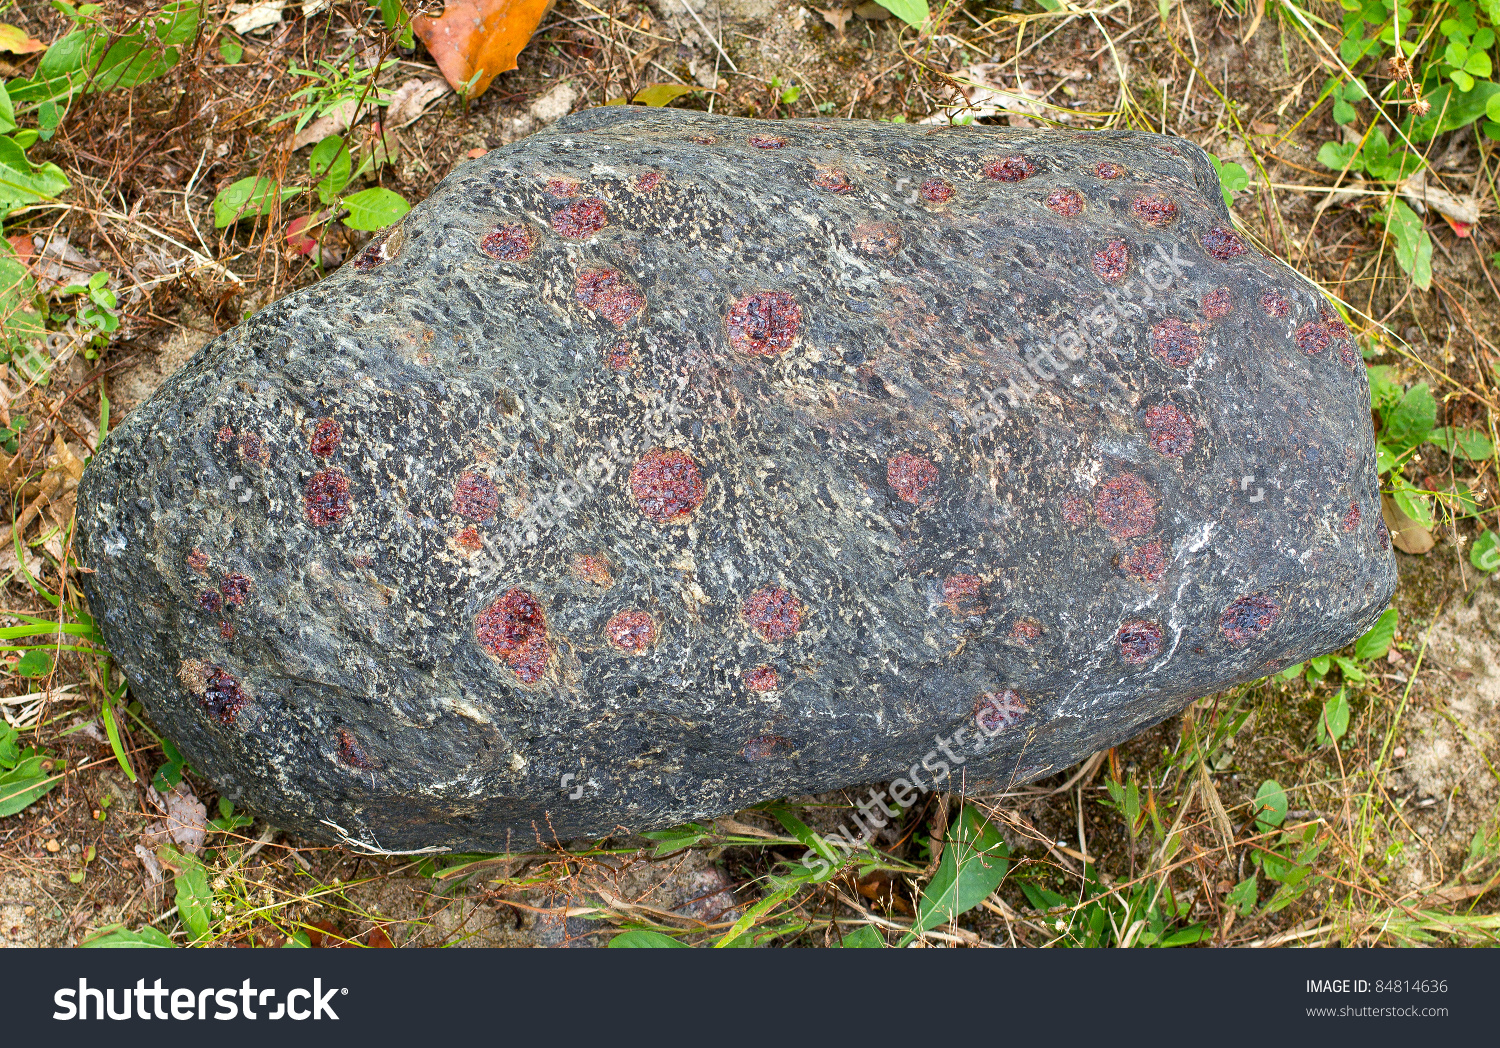 Garnet Crystals Embedded In A Large Gray Rock Stock Photo 84814636.